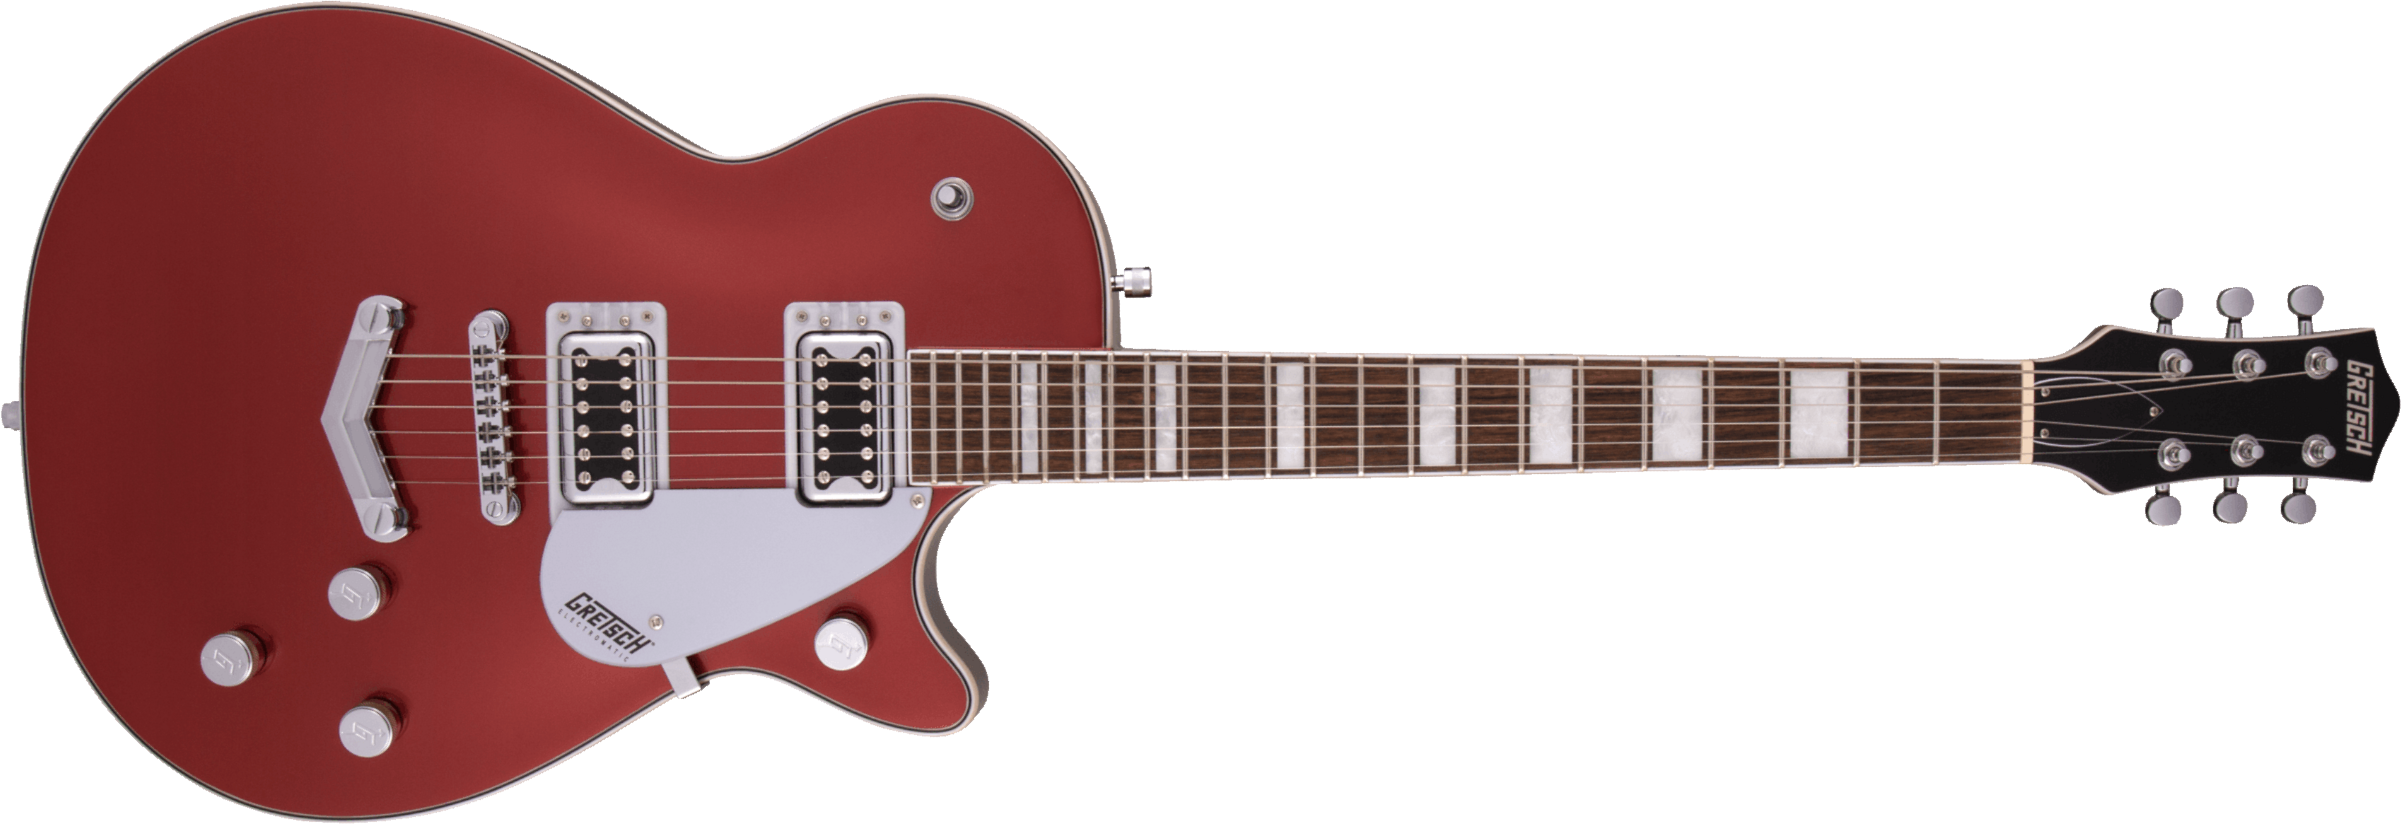 Gretsch G5220 Electromatic Jet Bt V-stoptail Hh Ht Lau - Firestick Red - Single cut electric guitar - Main picture